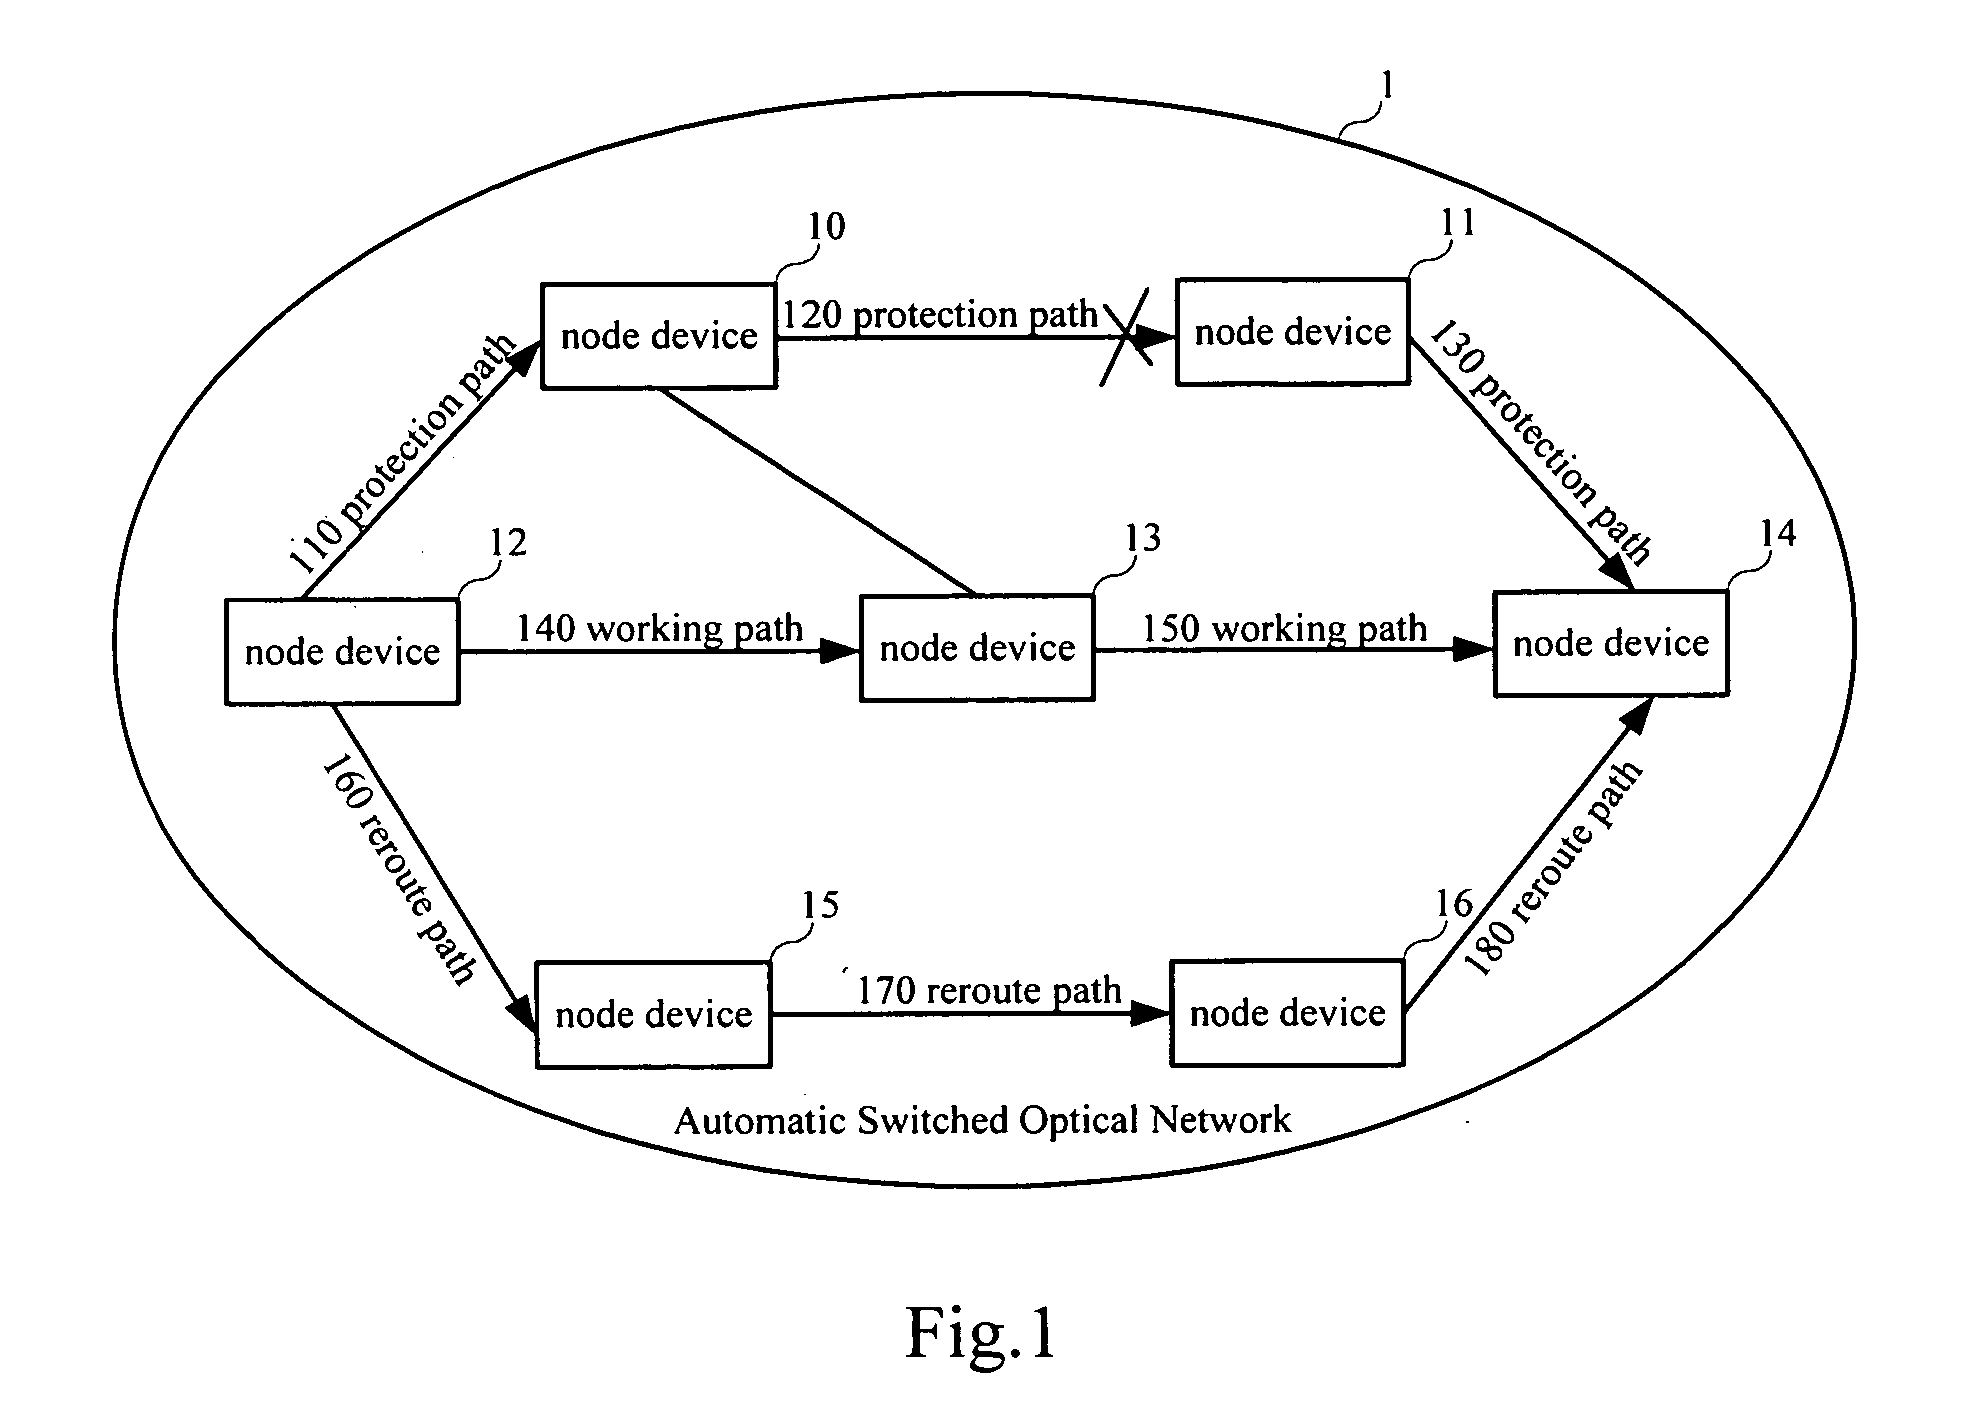 Method of implementing association in Automatic Switched Optical Network (ASON)